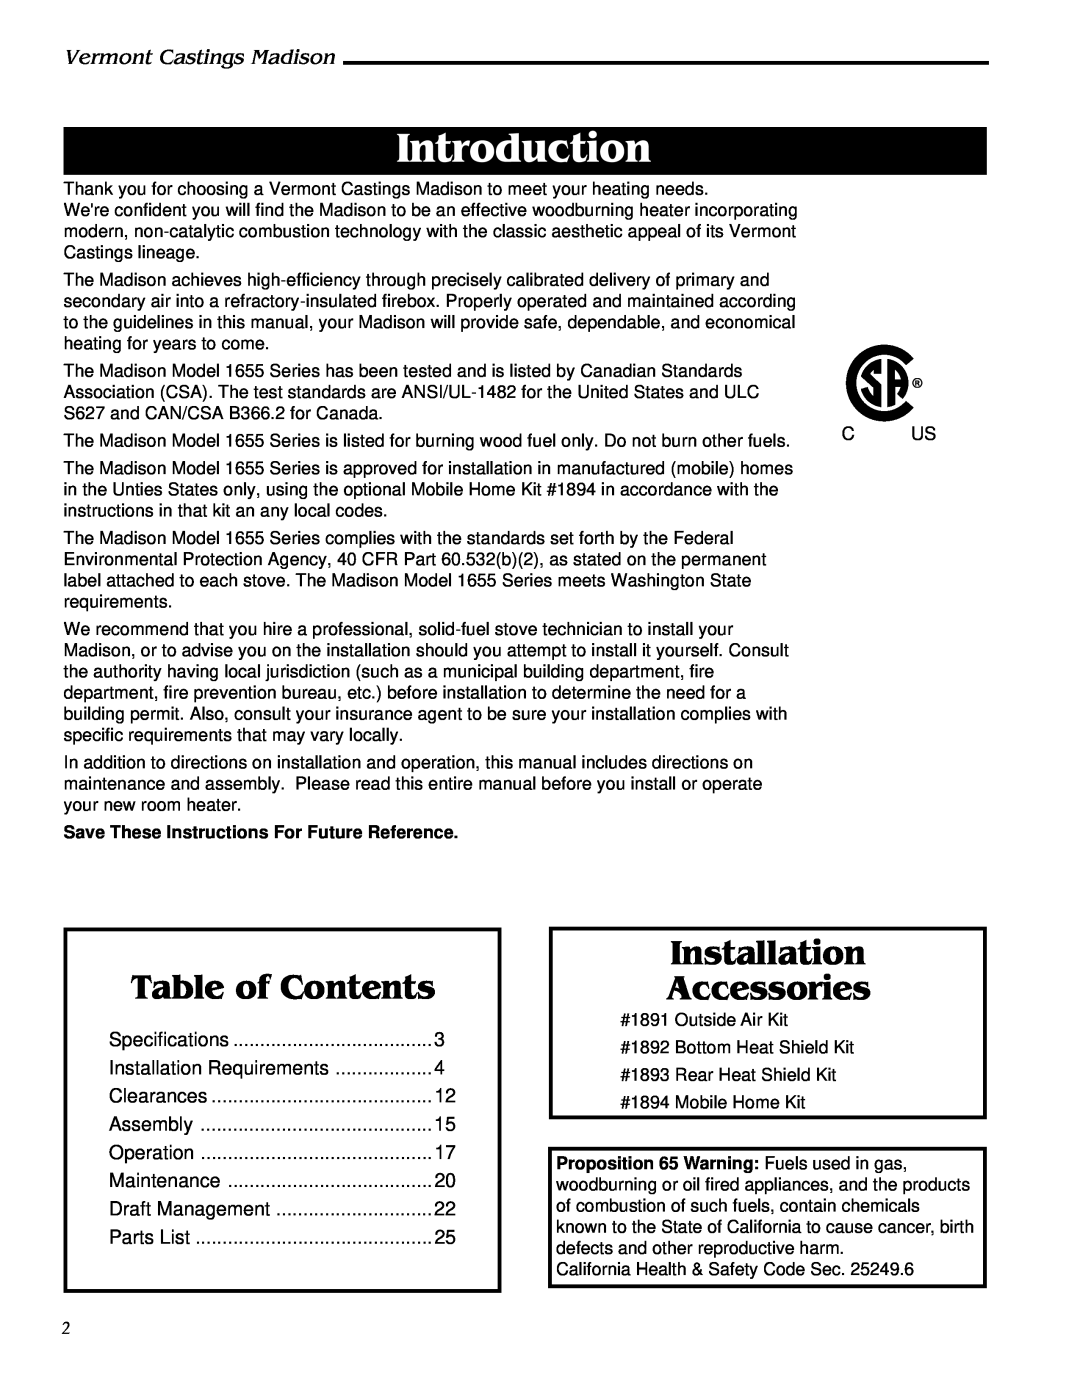 Vermont Casting 1655, 1656, 1657, 1658, 1659 Introduction, Table of Contents, Installation Accessories 